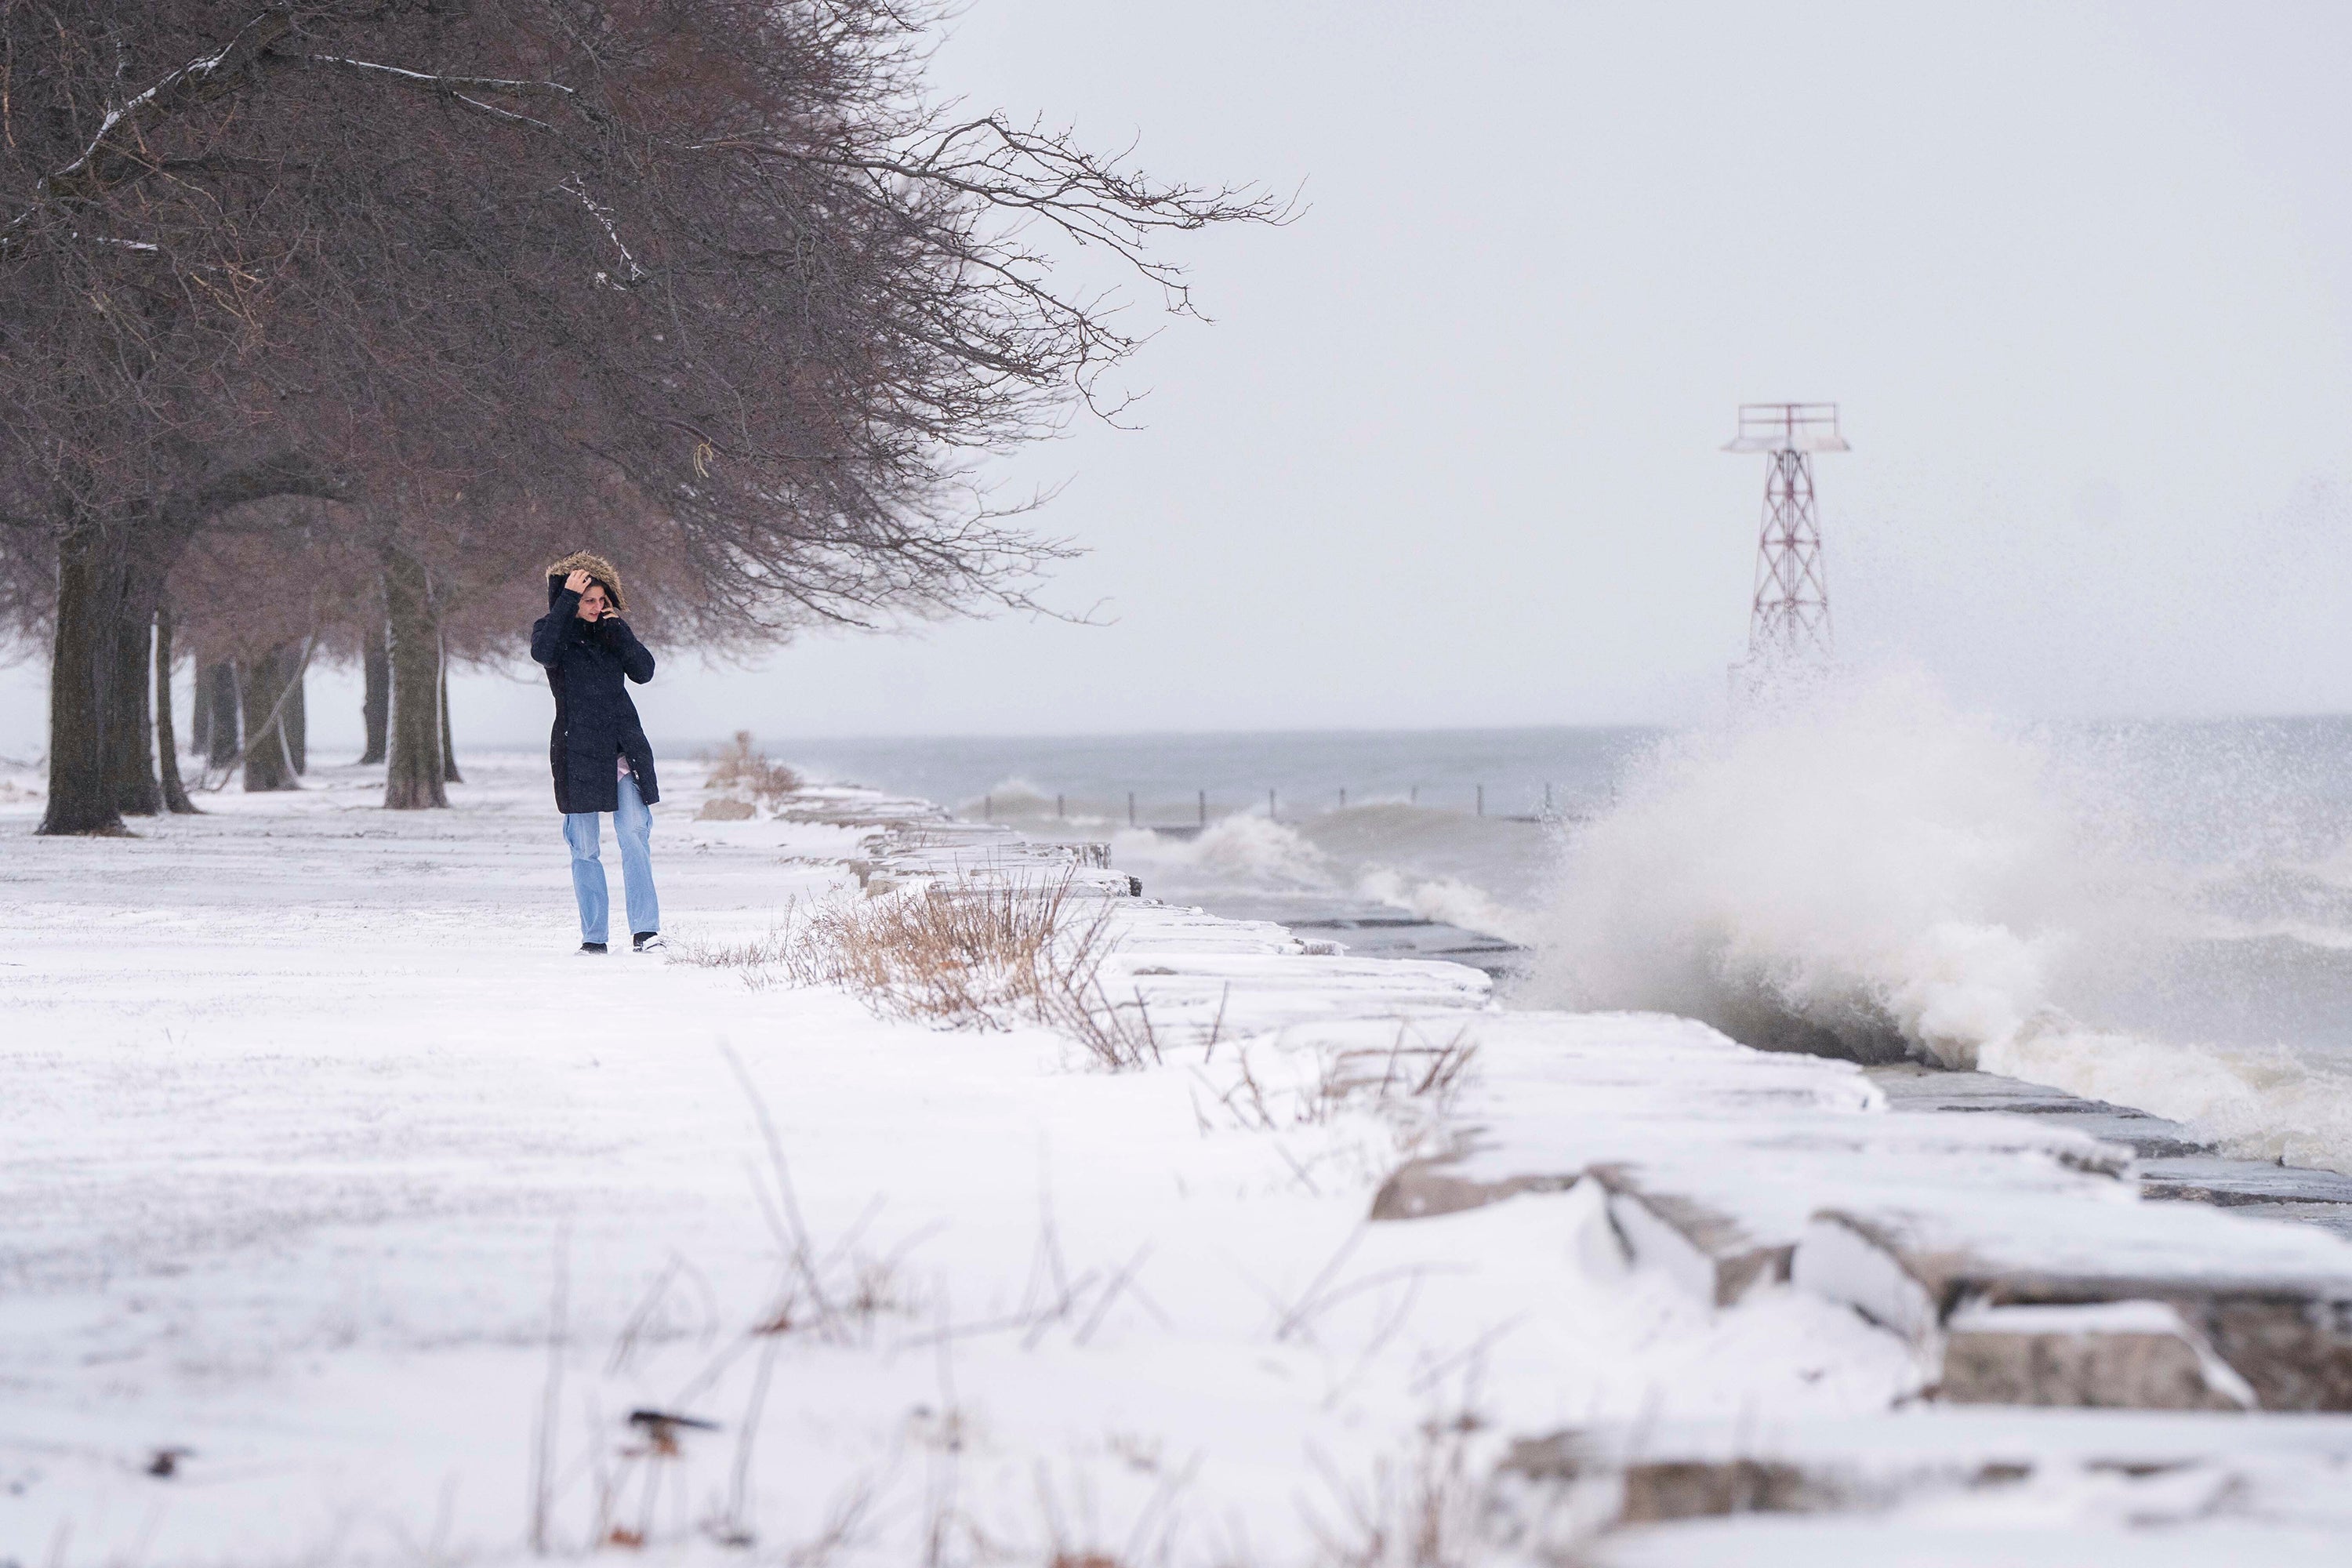 A person looks at Lake Michigan’s strong waves near Foster Beach after a major snowstorm hit the Chicago area